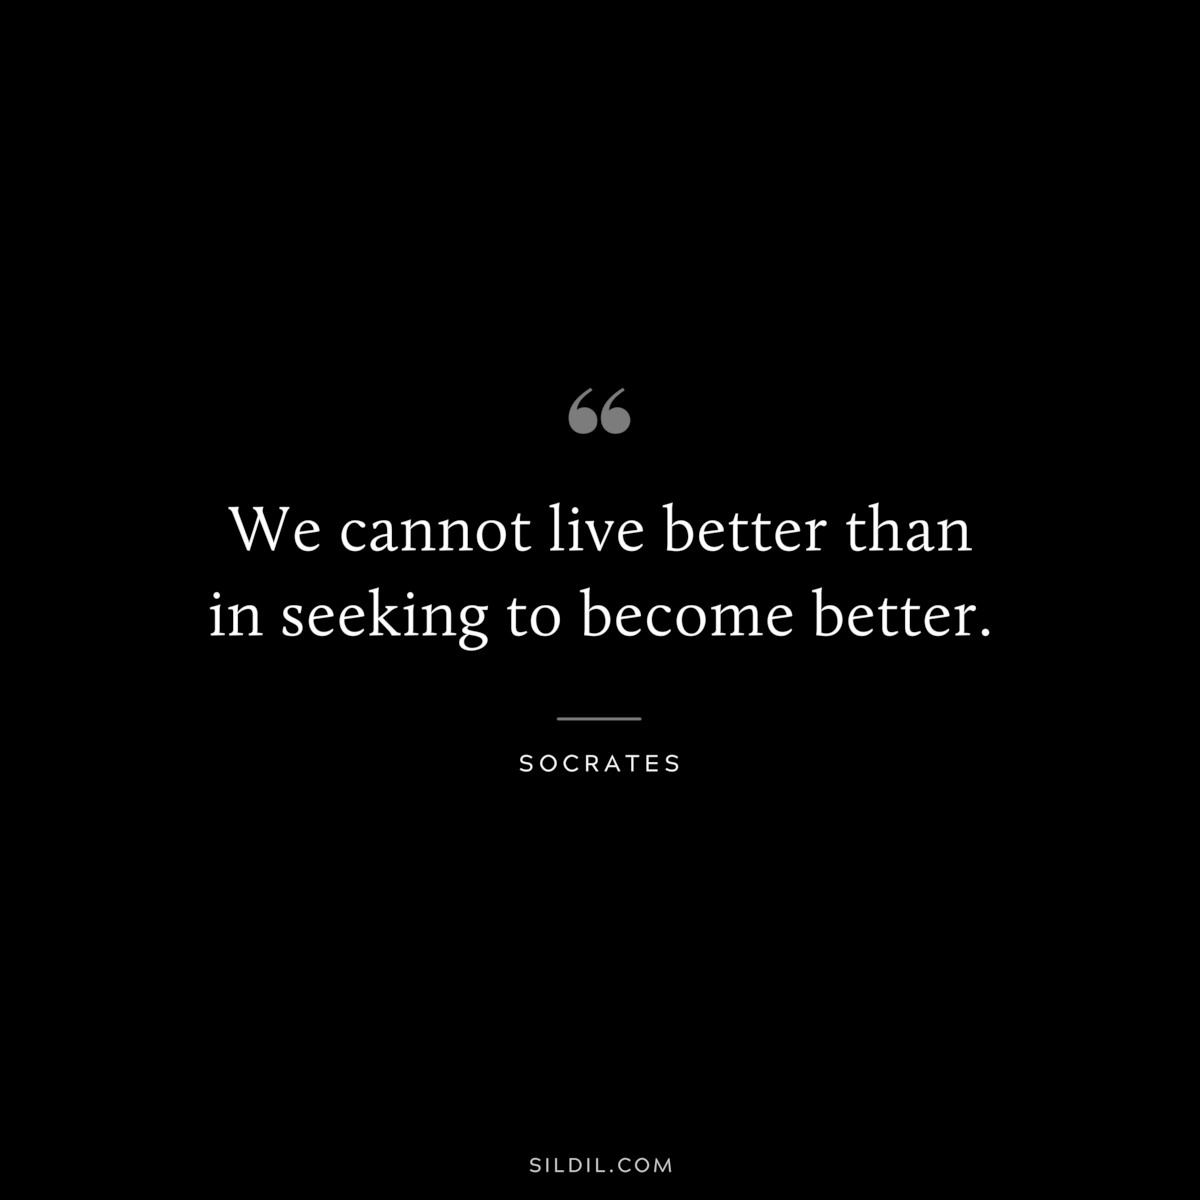 We cannot live better than in seeking to become better. ― Socrates